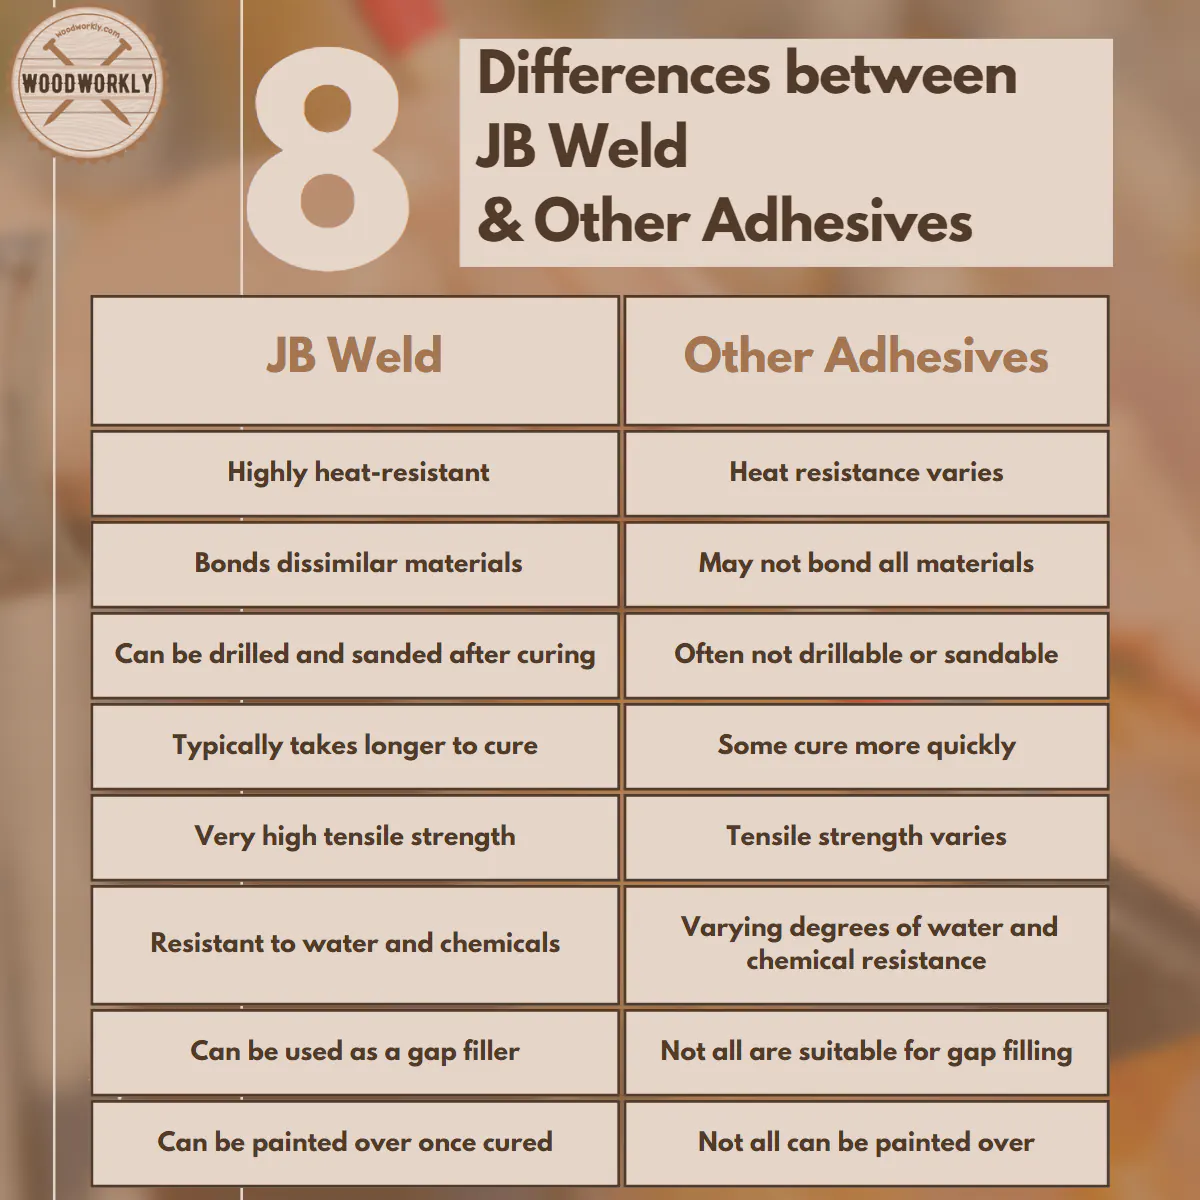 differences between JB weld and Other Adhesives